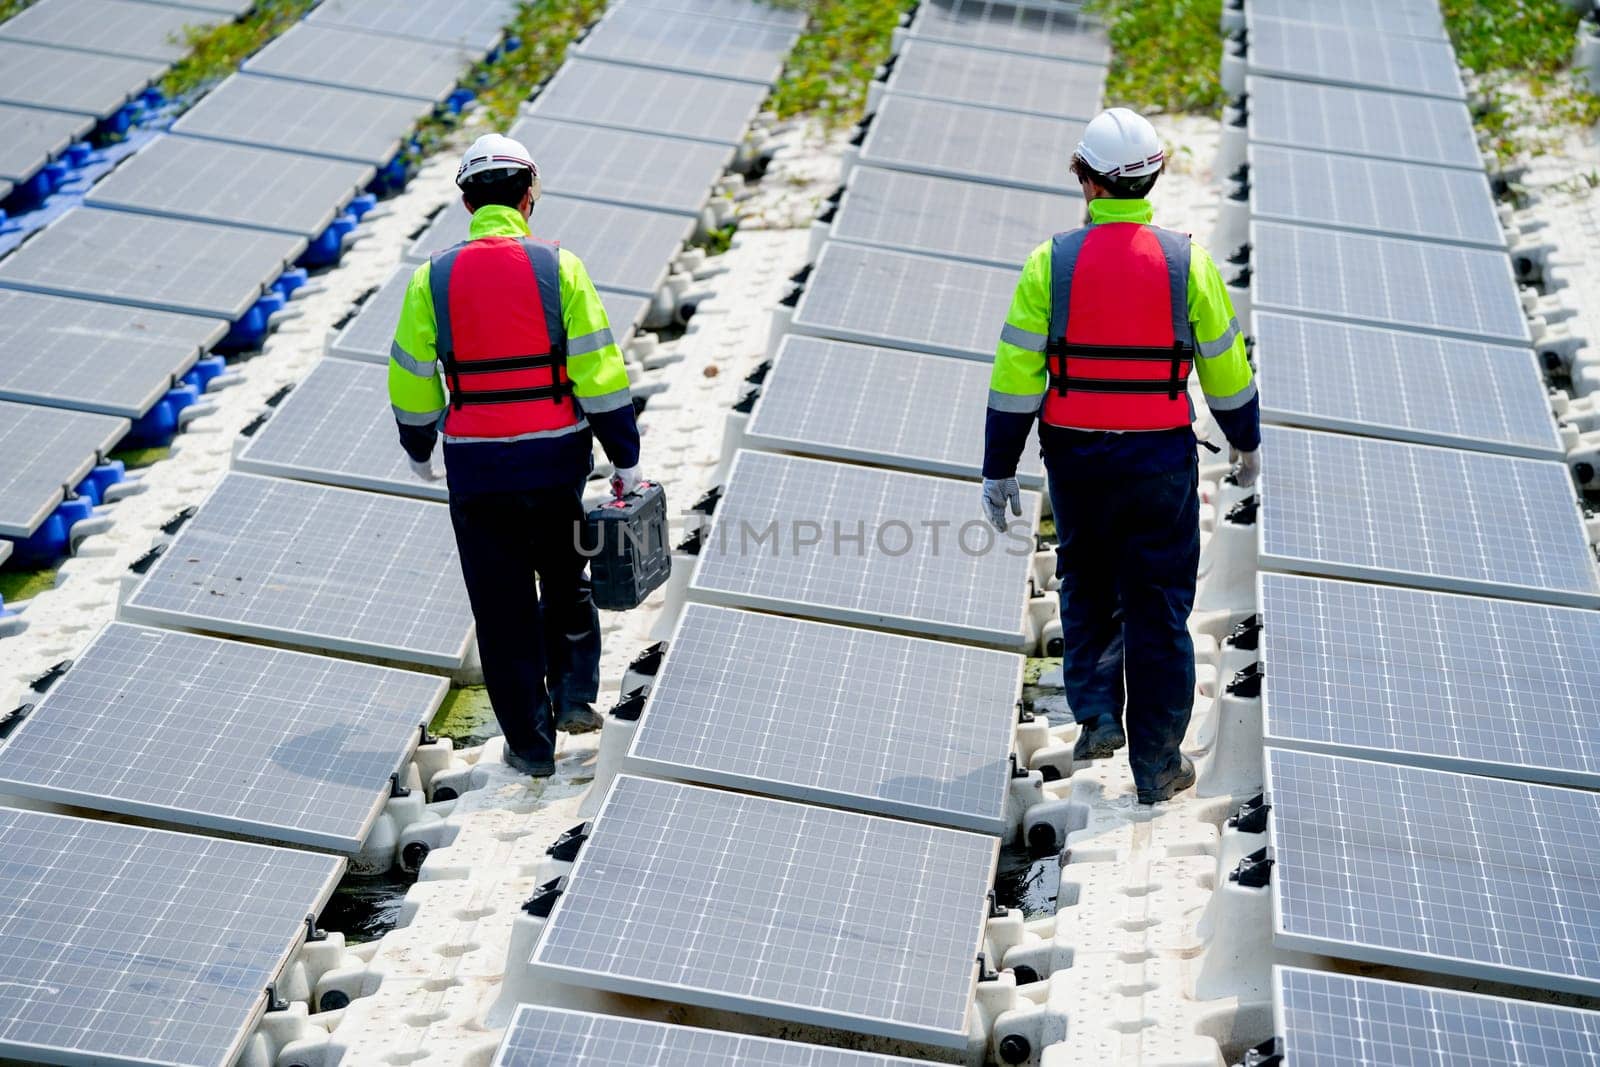 Back of professional with safety uniform walk on footpath along row of solar cell panels in workplace. by nrradmin